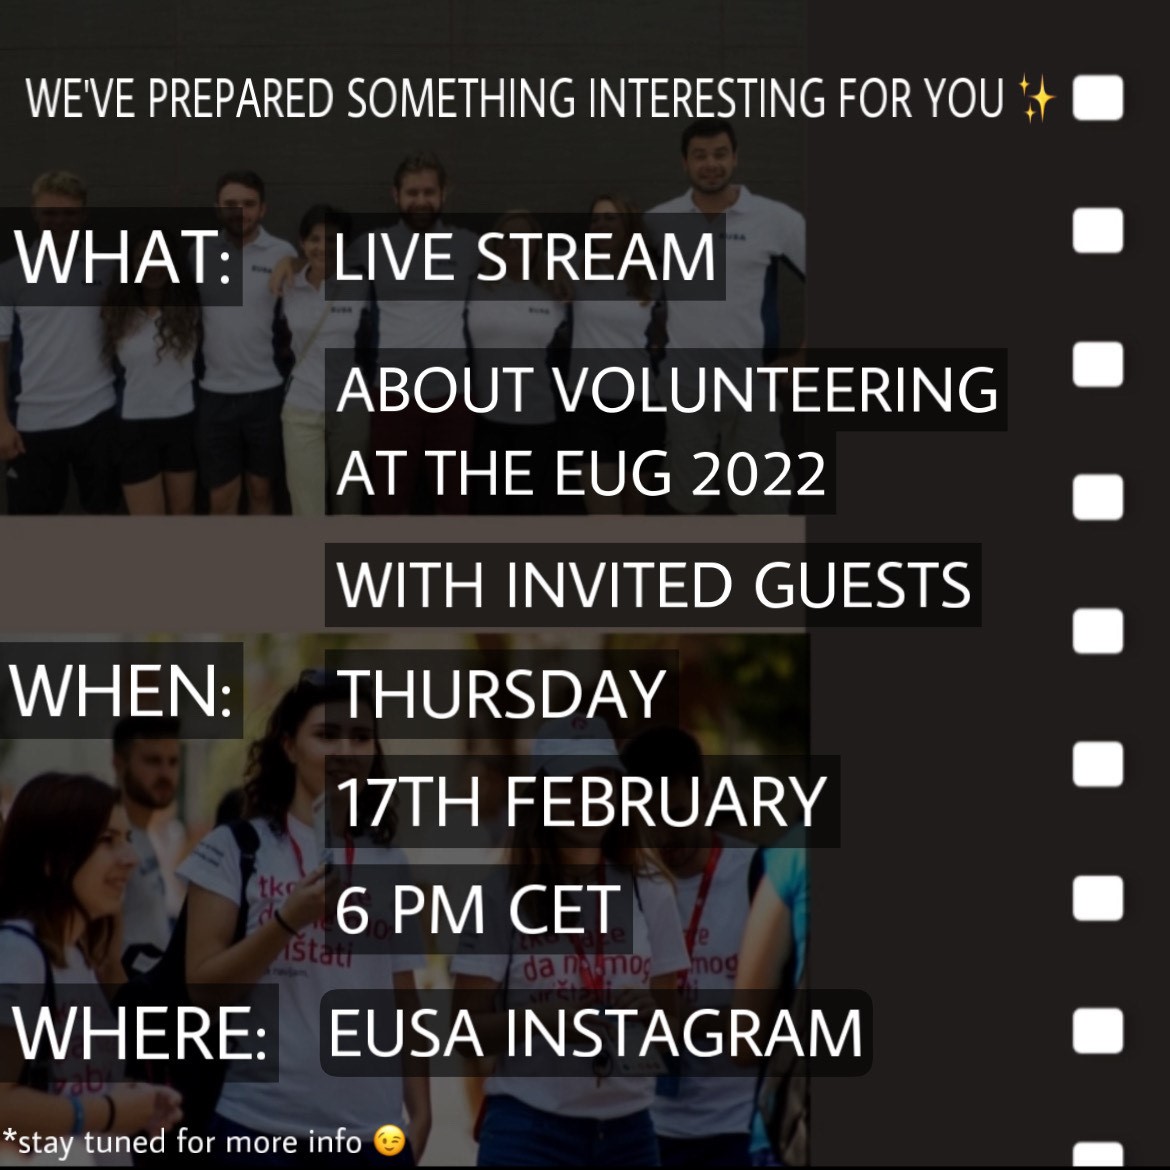 Follow the insta live event on February 17 on the eusaunisport Instagram page!